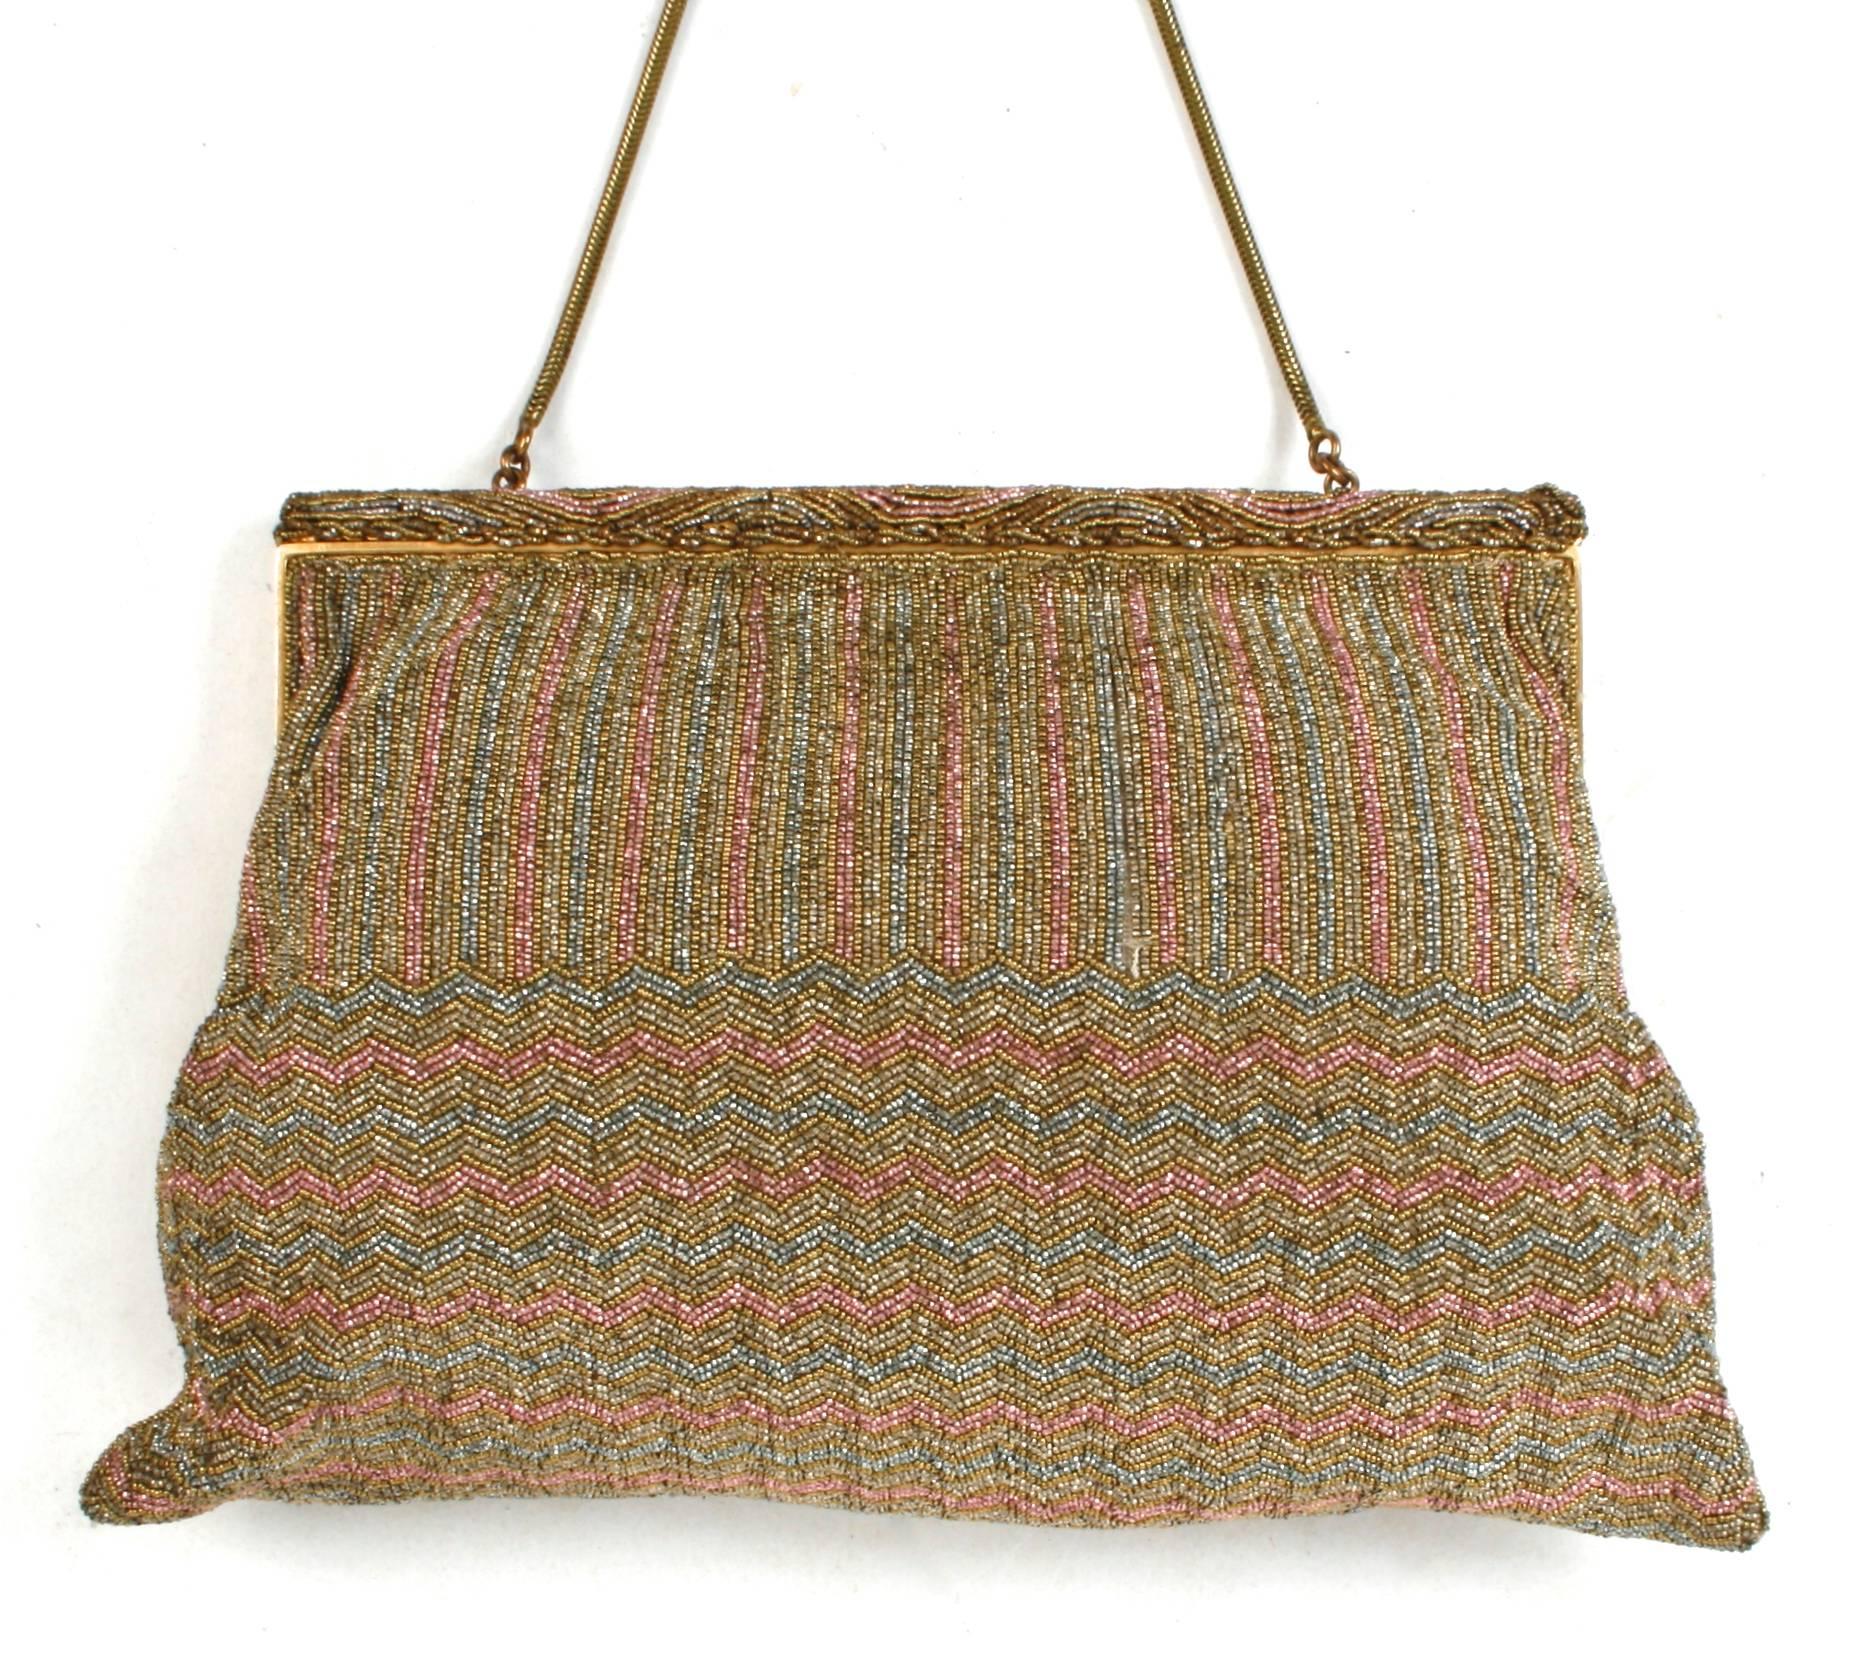 Very fine micro beaded evening bag in a striped and zig zag pattern. Beads are copper, gold and silver. It has a gold-tone metal hinged frame with a wave beaded top band.  Purse has a 12'' gold-tone snake chain handle and a hinged and beaded button